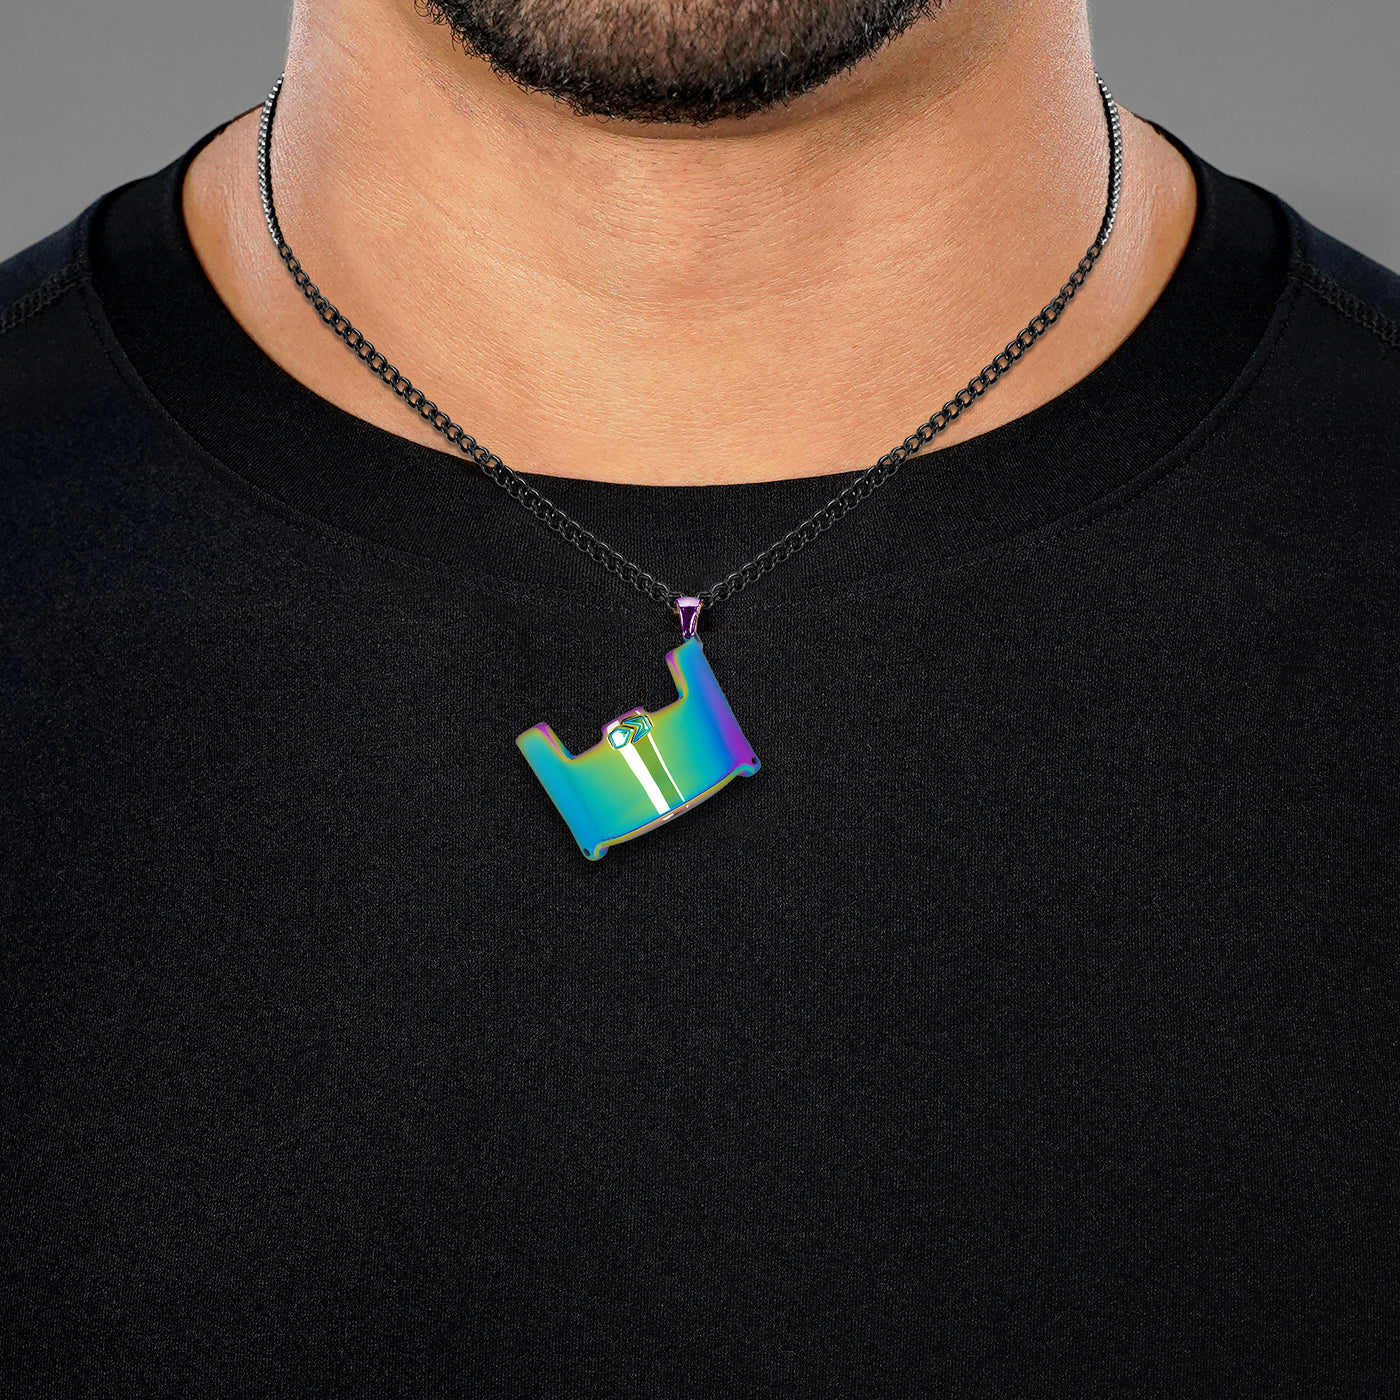 Helmet Visor Pendant with Chain Necklace - Borealis Stainless Steel